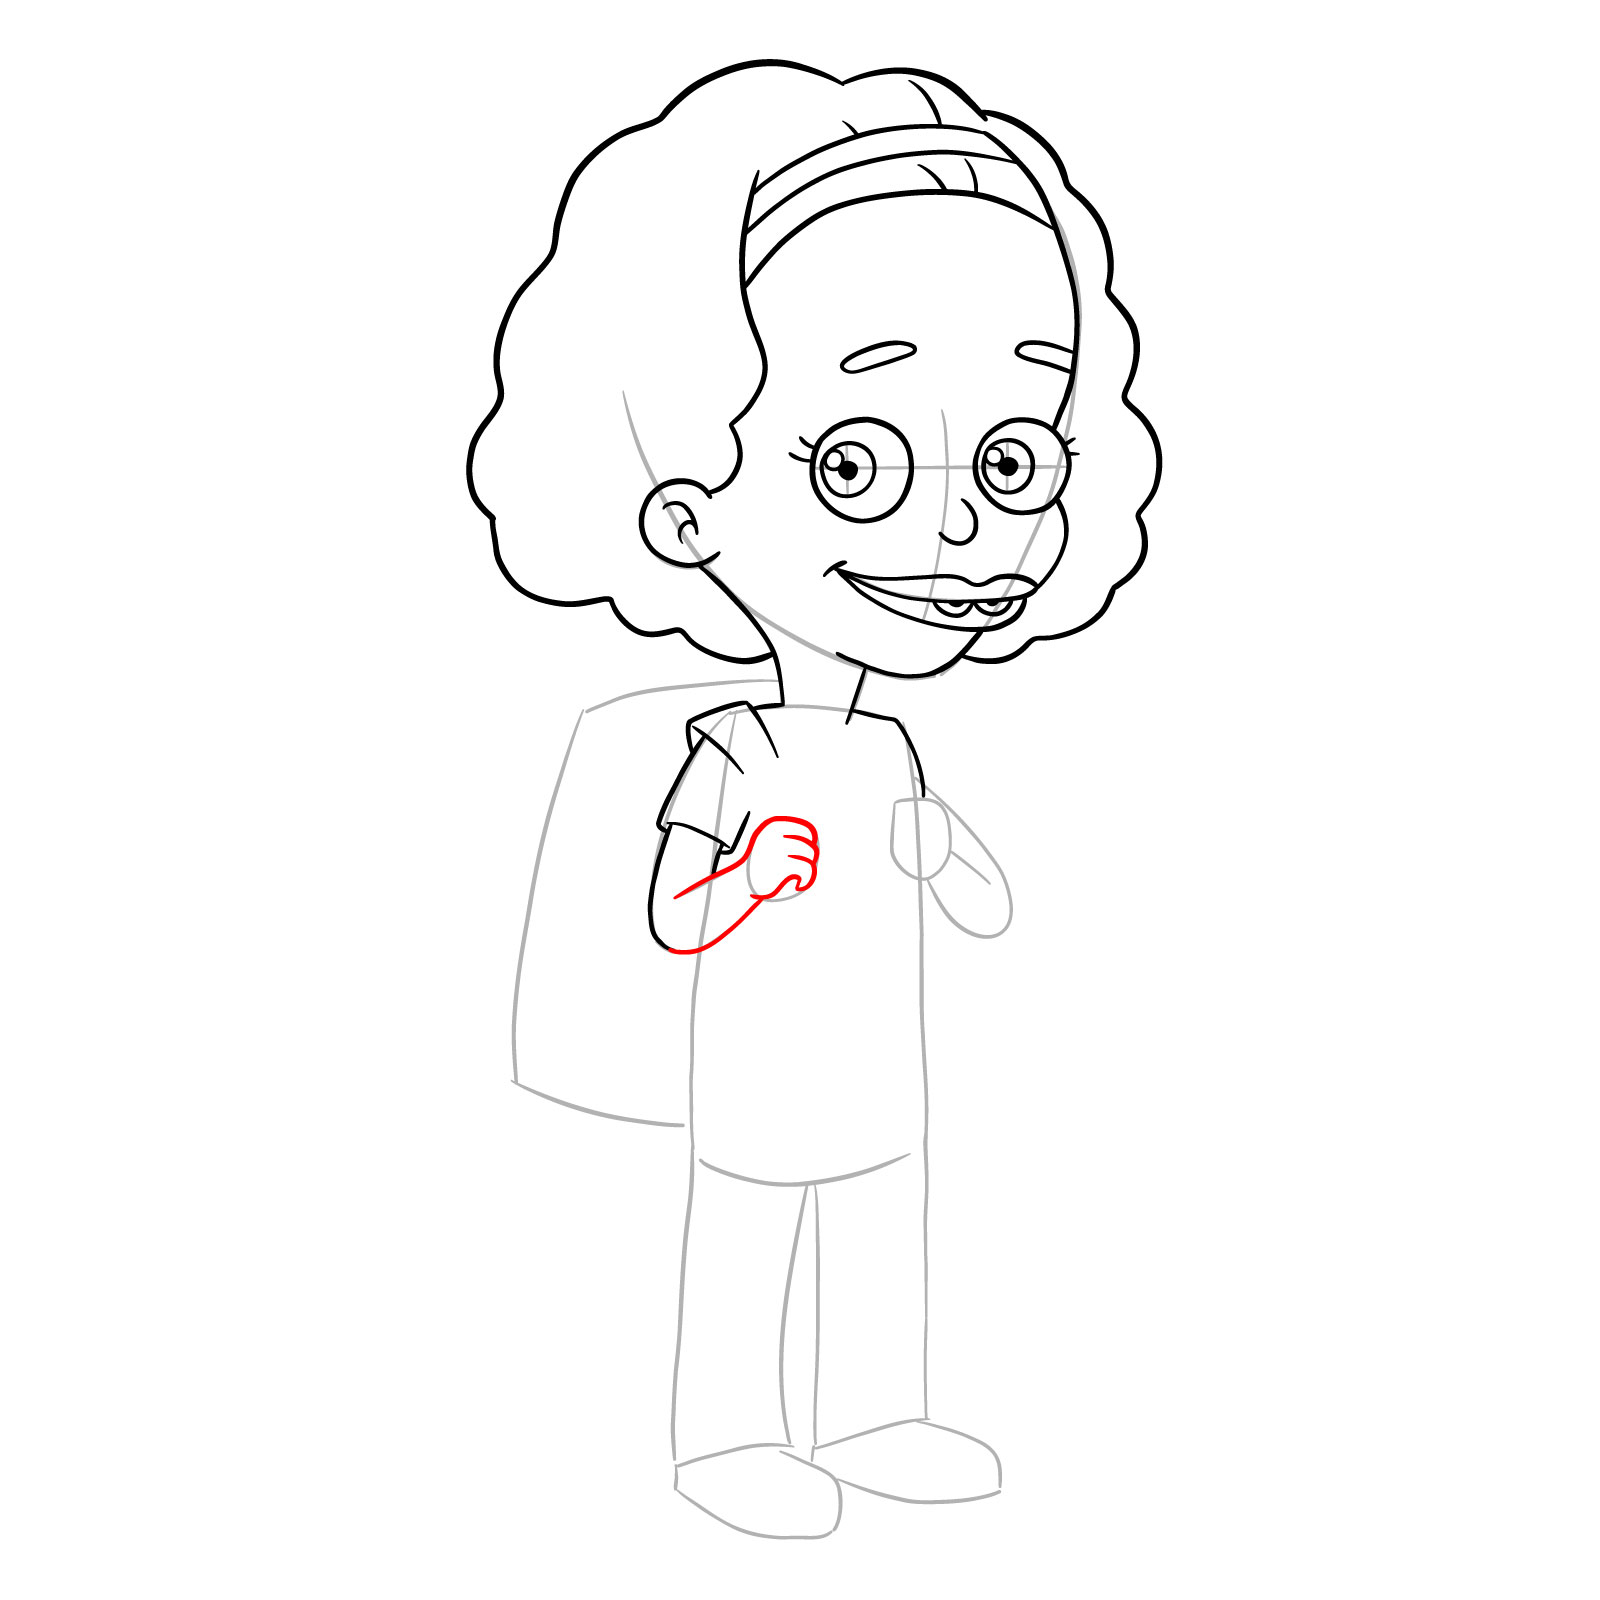 How to draw Missy from Big Mouth - step 15